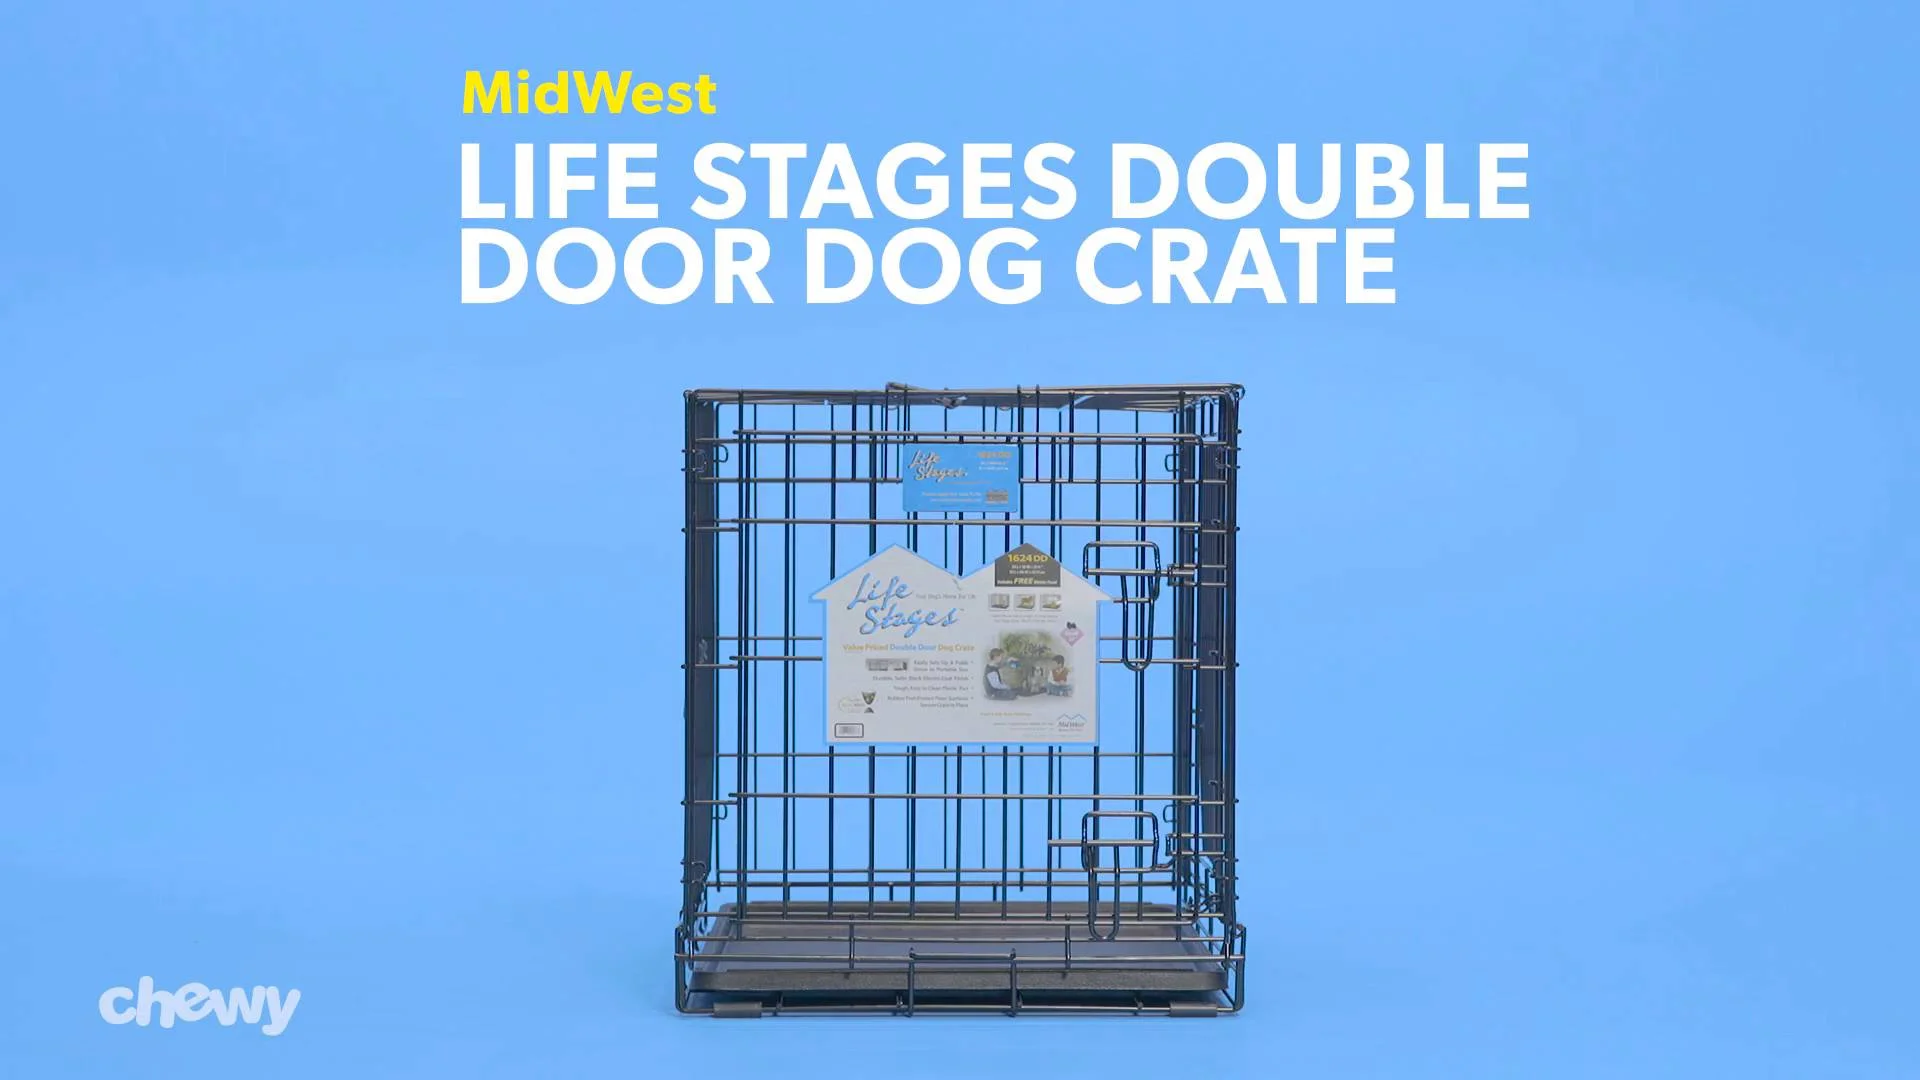 midwest lifestages double door dog crate